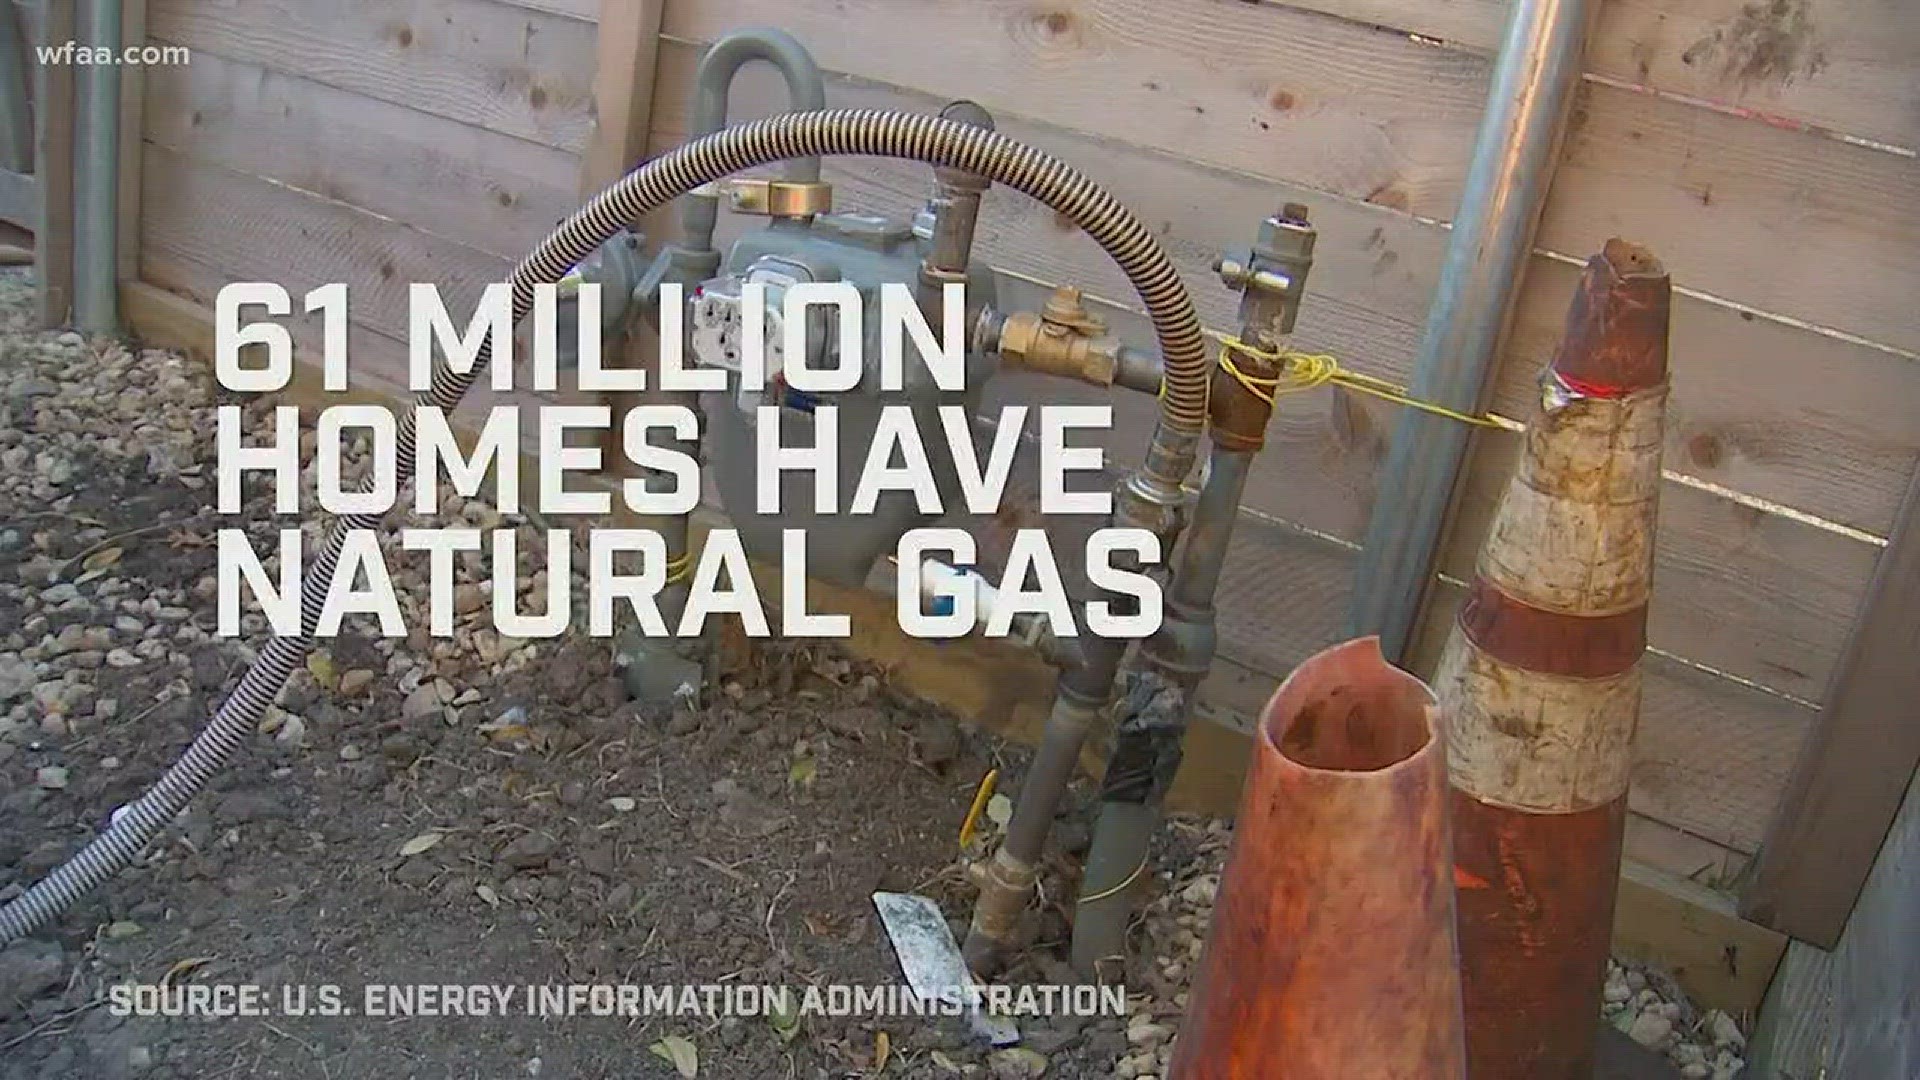 Verify: Is natural gas safe?